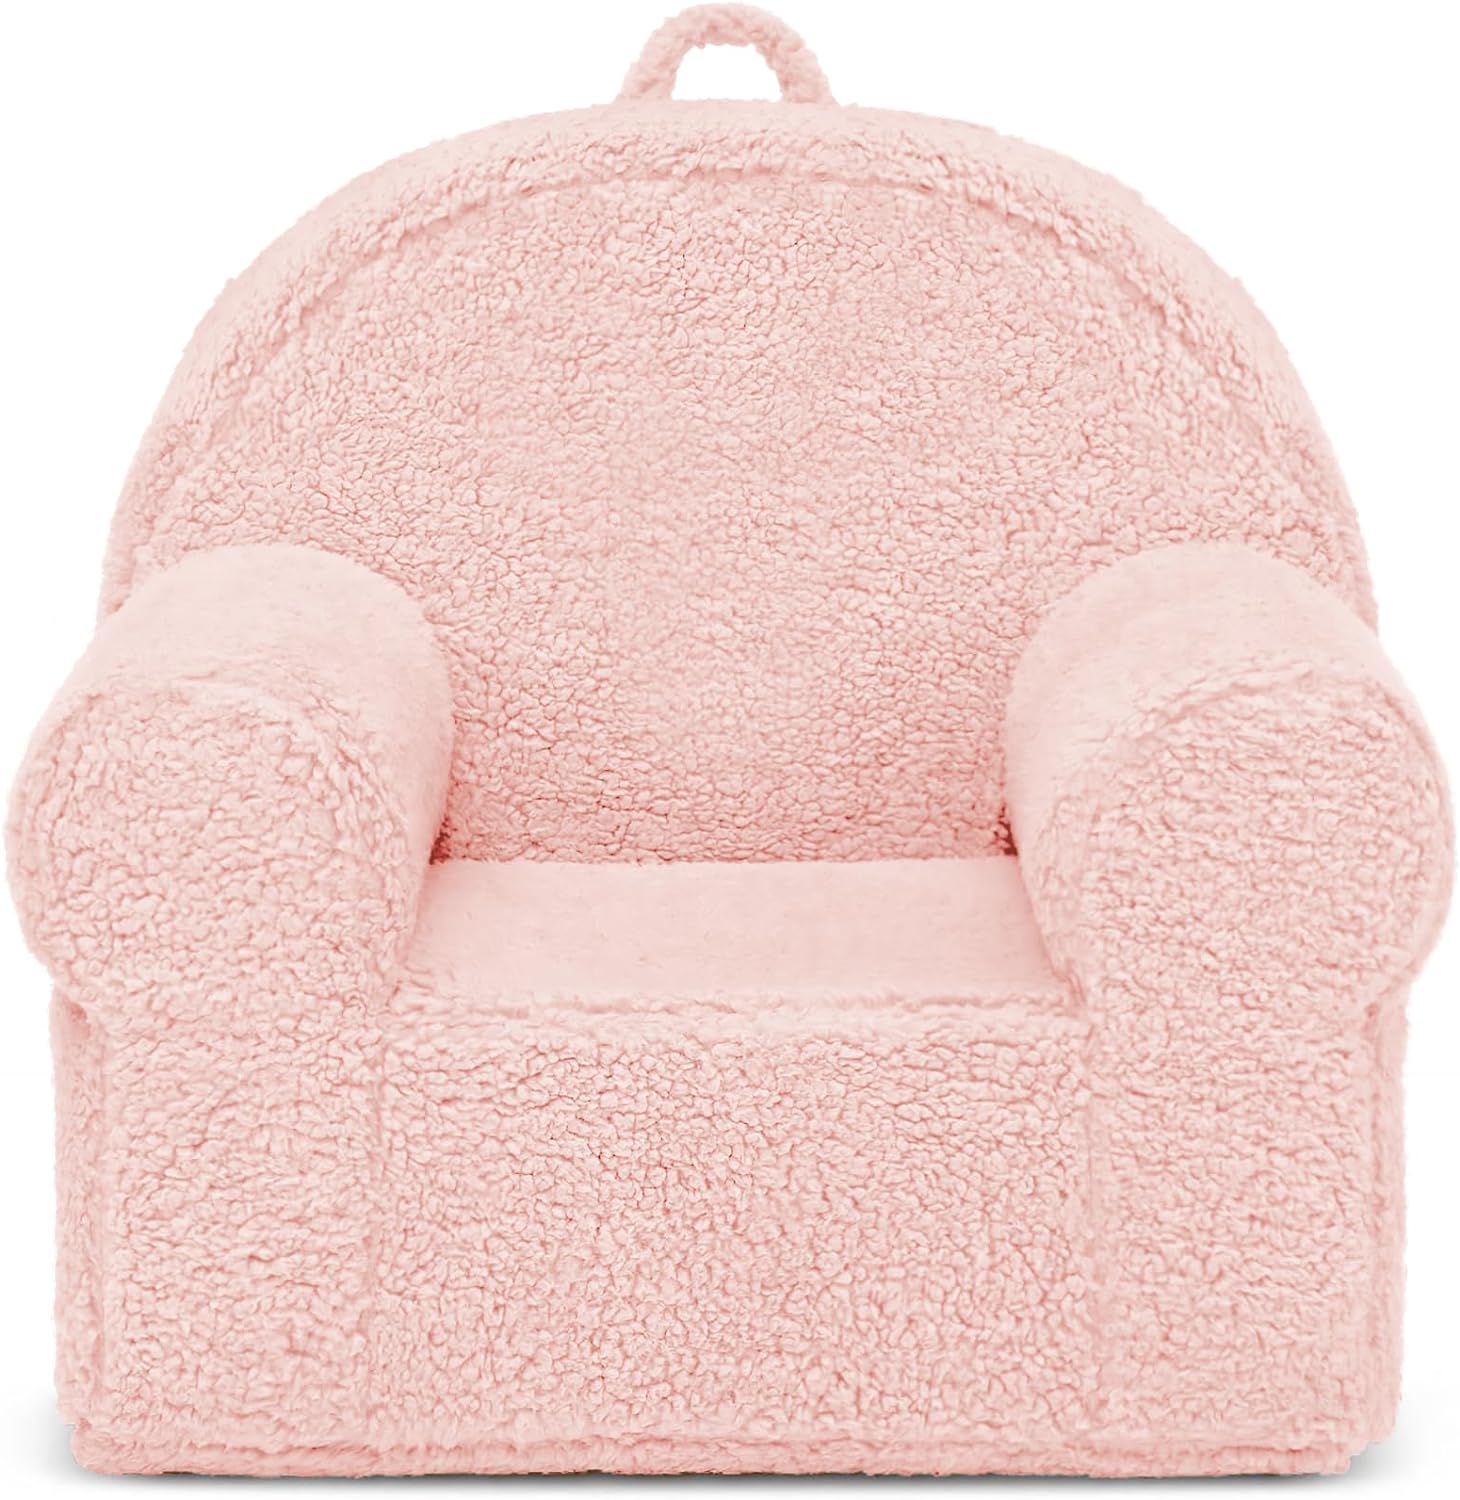 A pink teddy bear chair - Pottery Barn Kids look for less - on a white background.